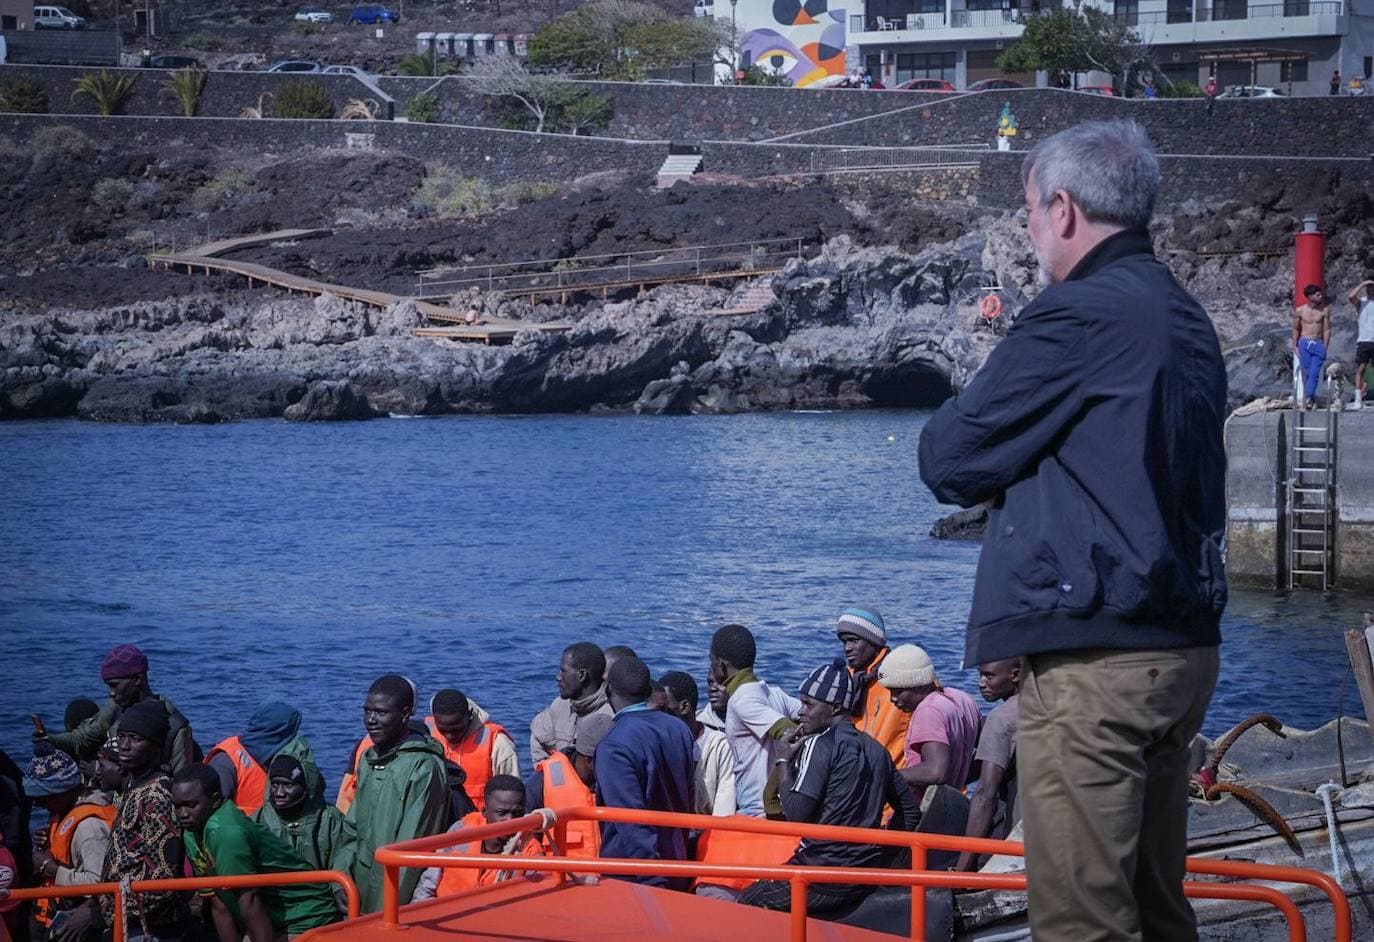 The Canary Islands demand more resources and "more doctors" to care for migrants in El Hierro